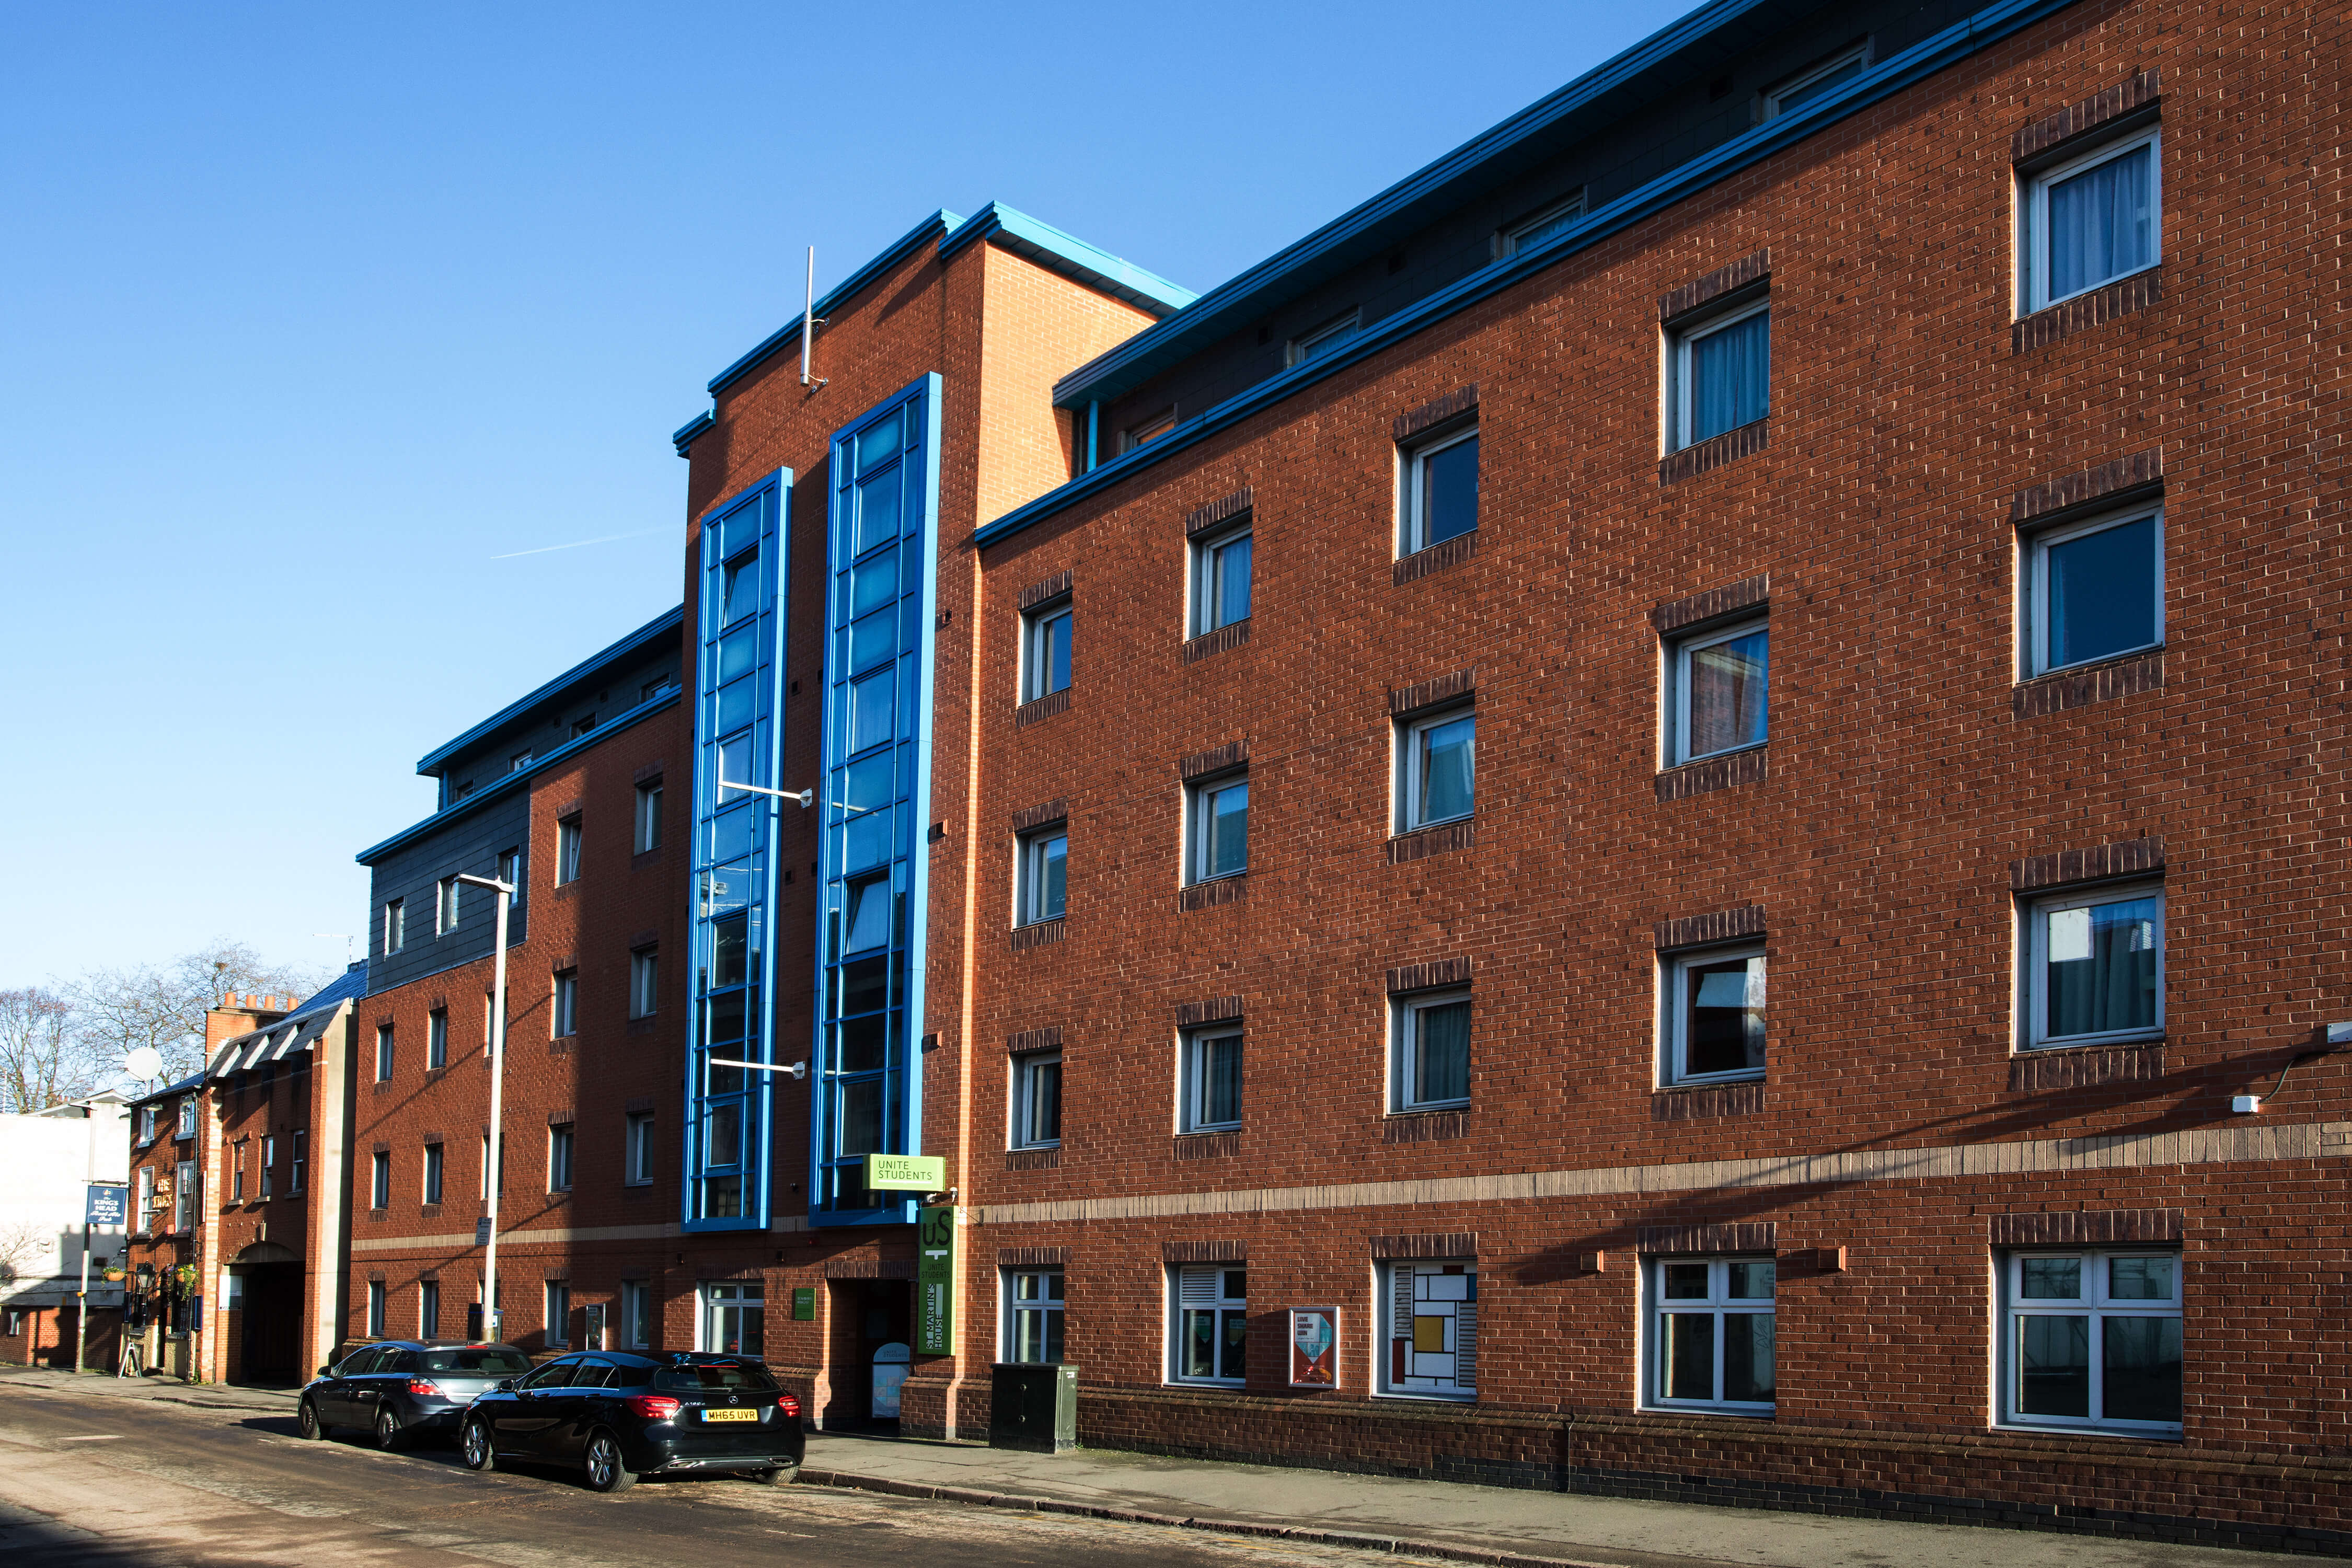 Unite Students accommodation at St Martin's House in Leicester